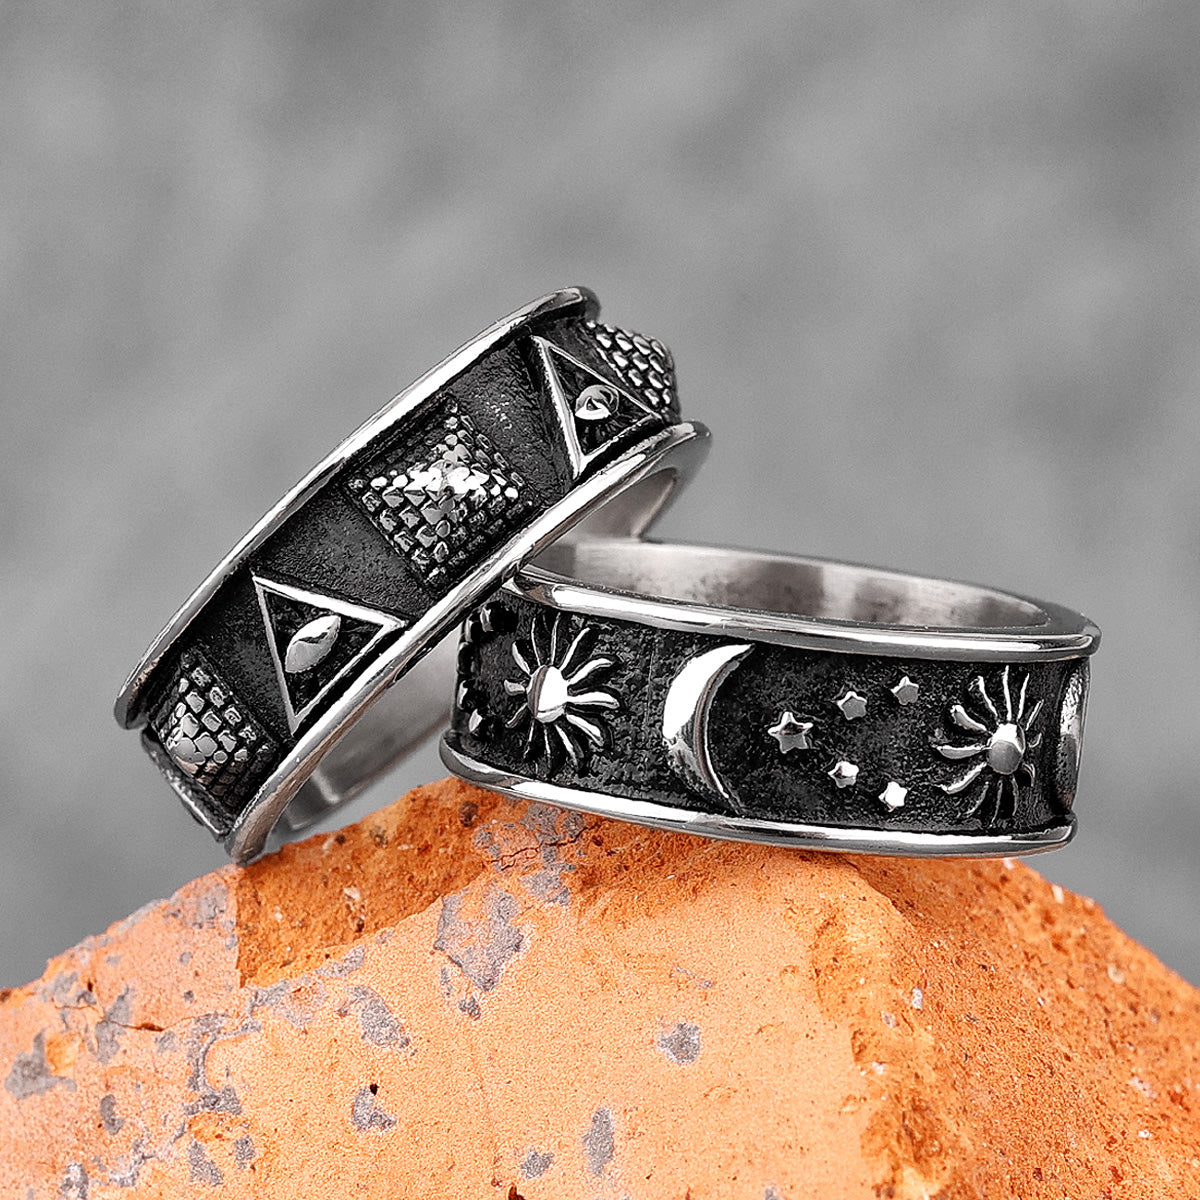 Cosmic Symbols Stainless Steel Amulet Ring